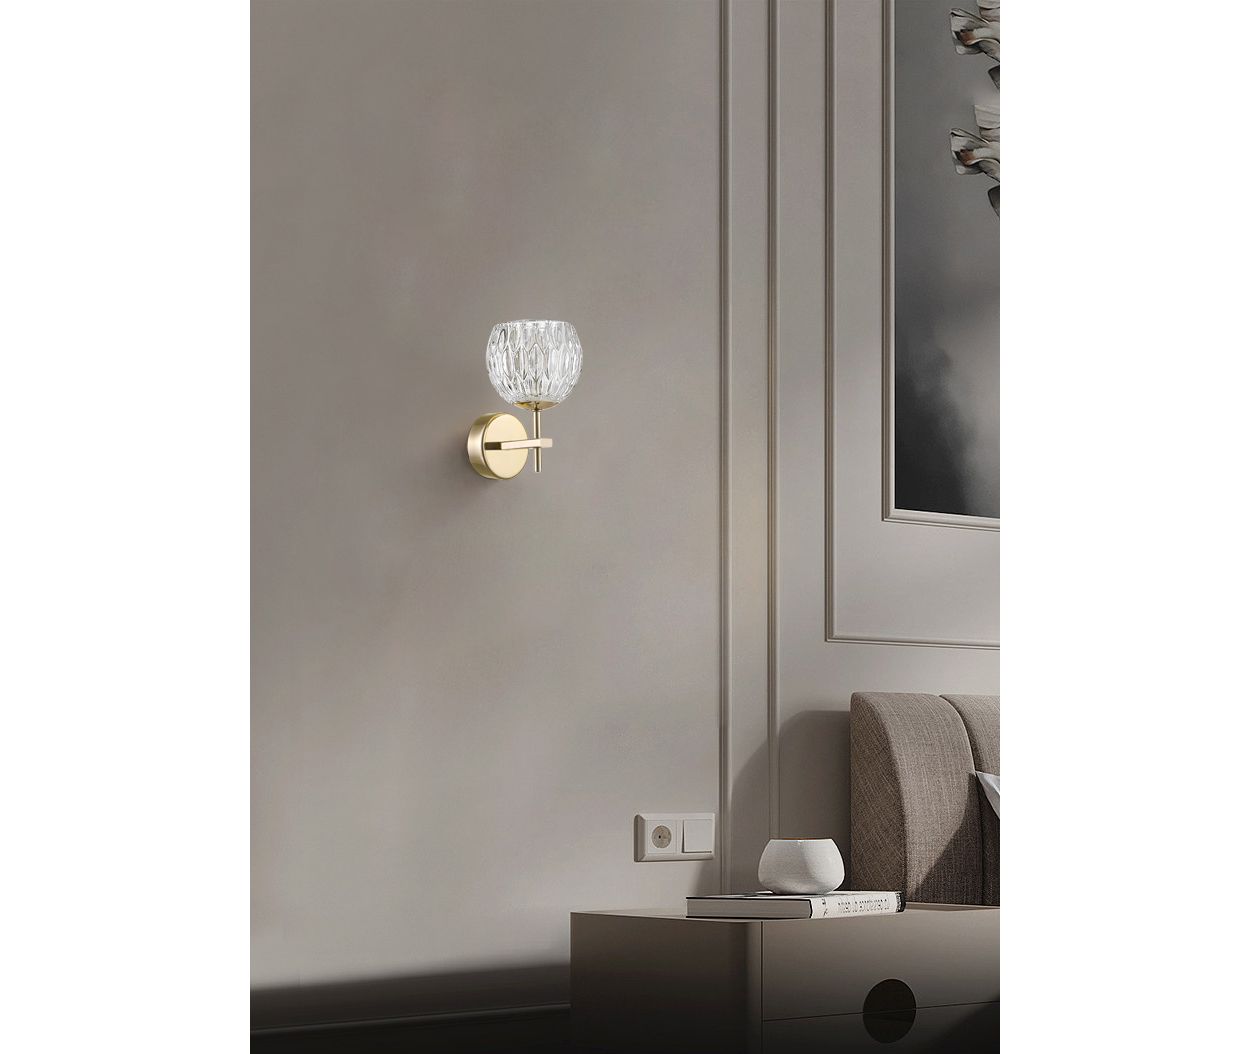 Contemporary-styled wall light with beautiful looks